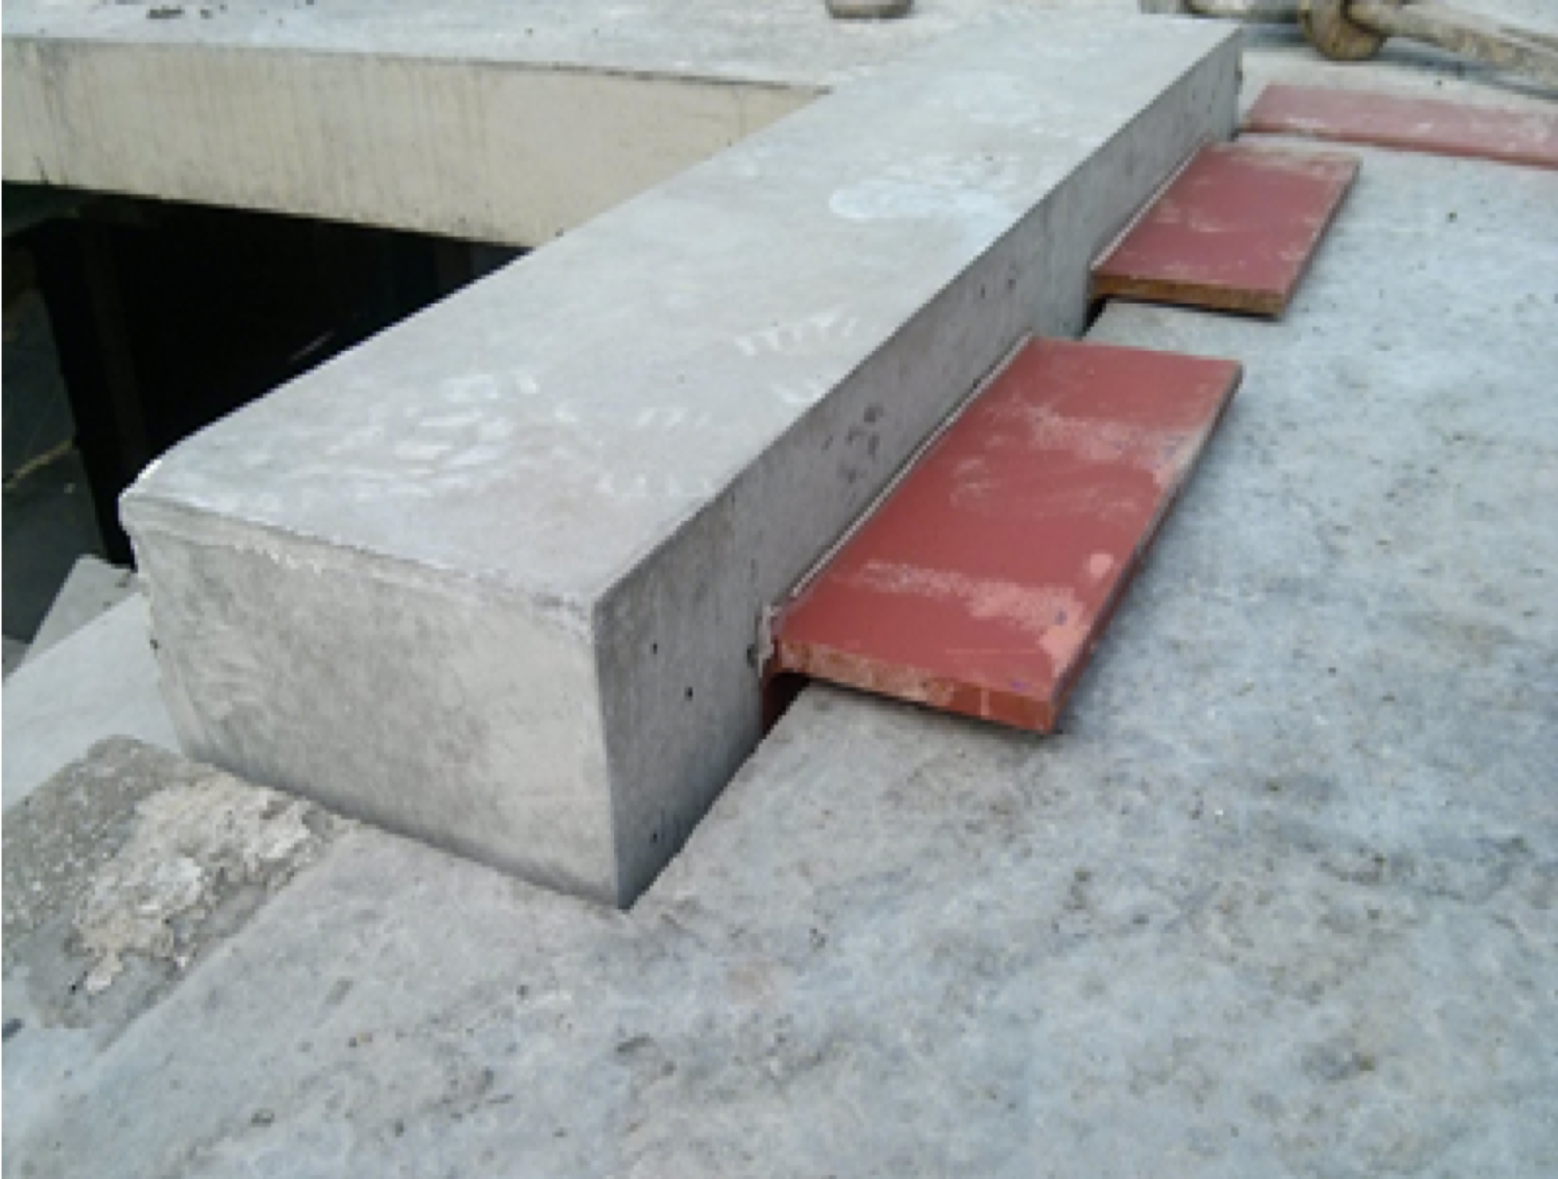 precast concrete stair with steel support at flight ends